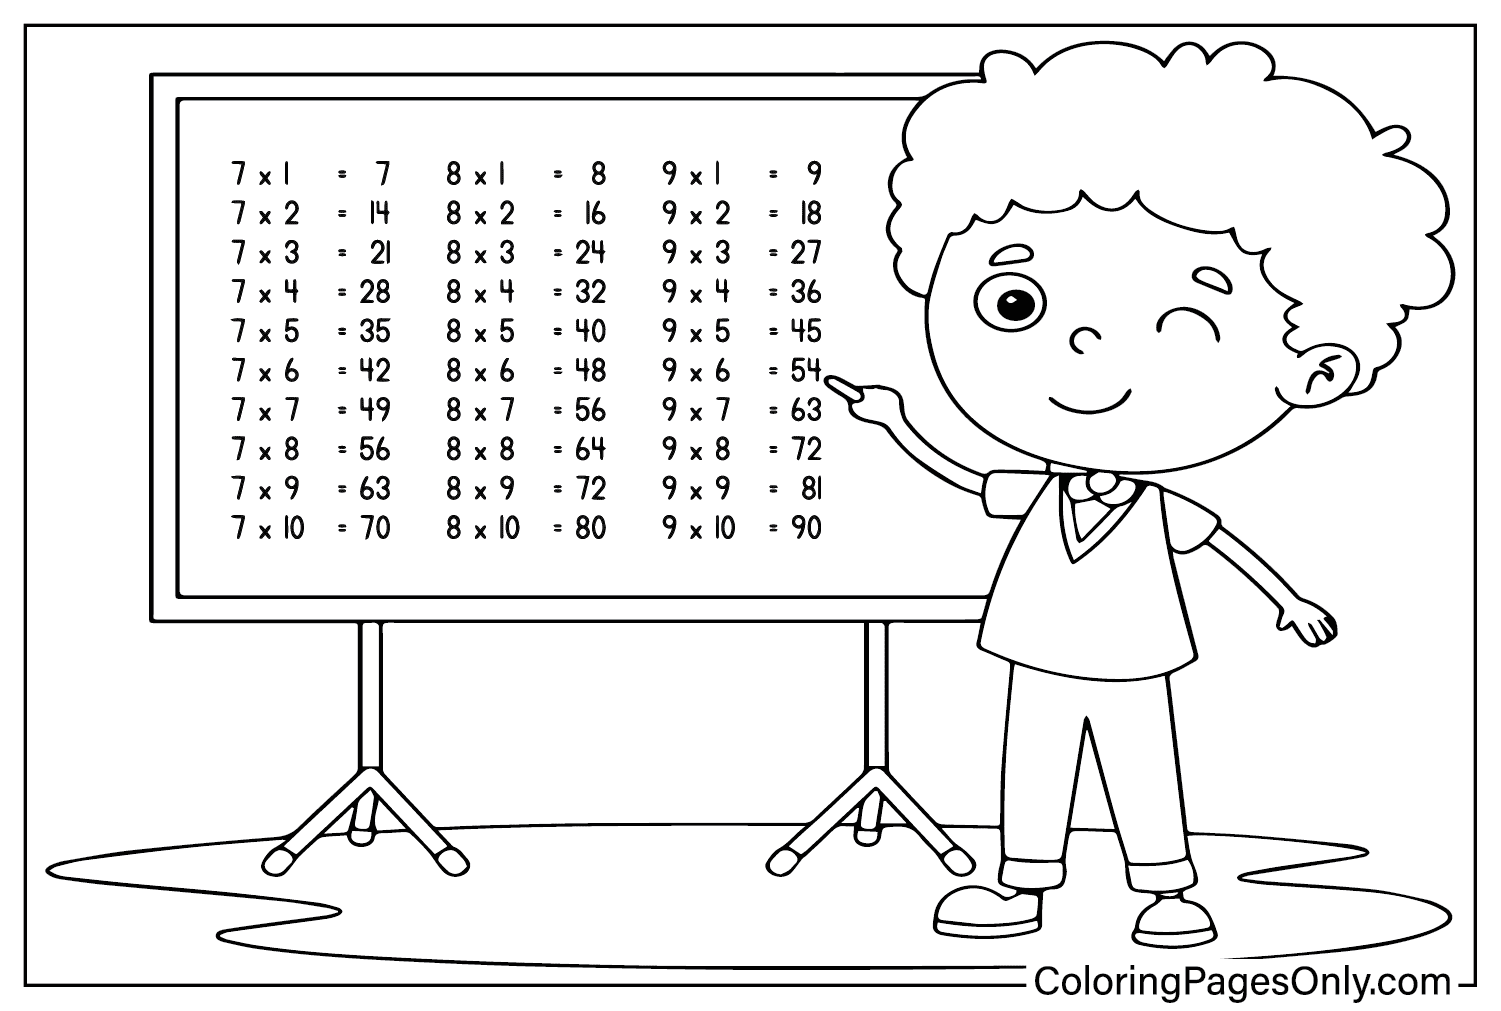 Printable Multiplication Chart Color from Multiplication Chart